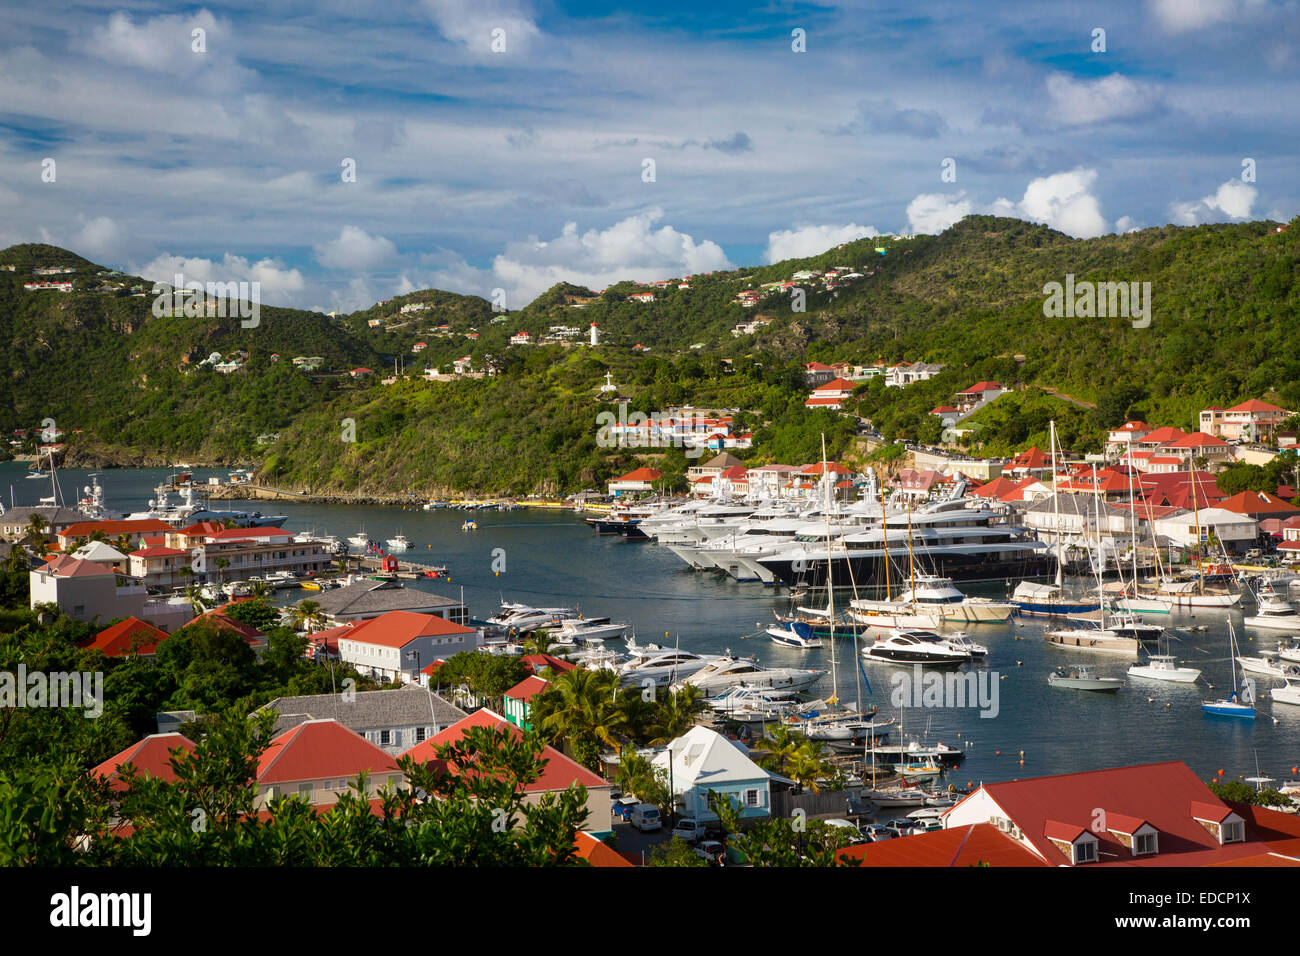 Boats crowd the marina in Gustavia, St Barths, French West Indies Stock Photo